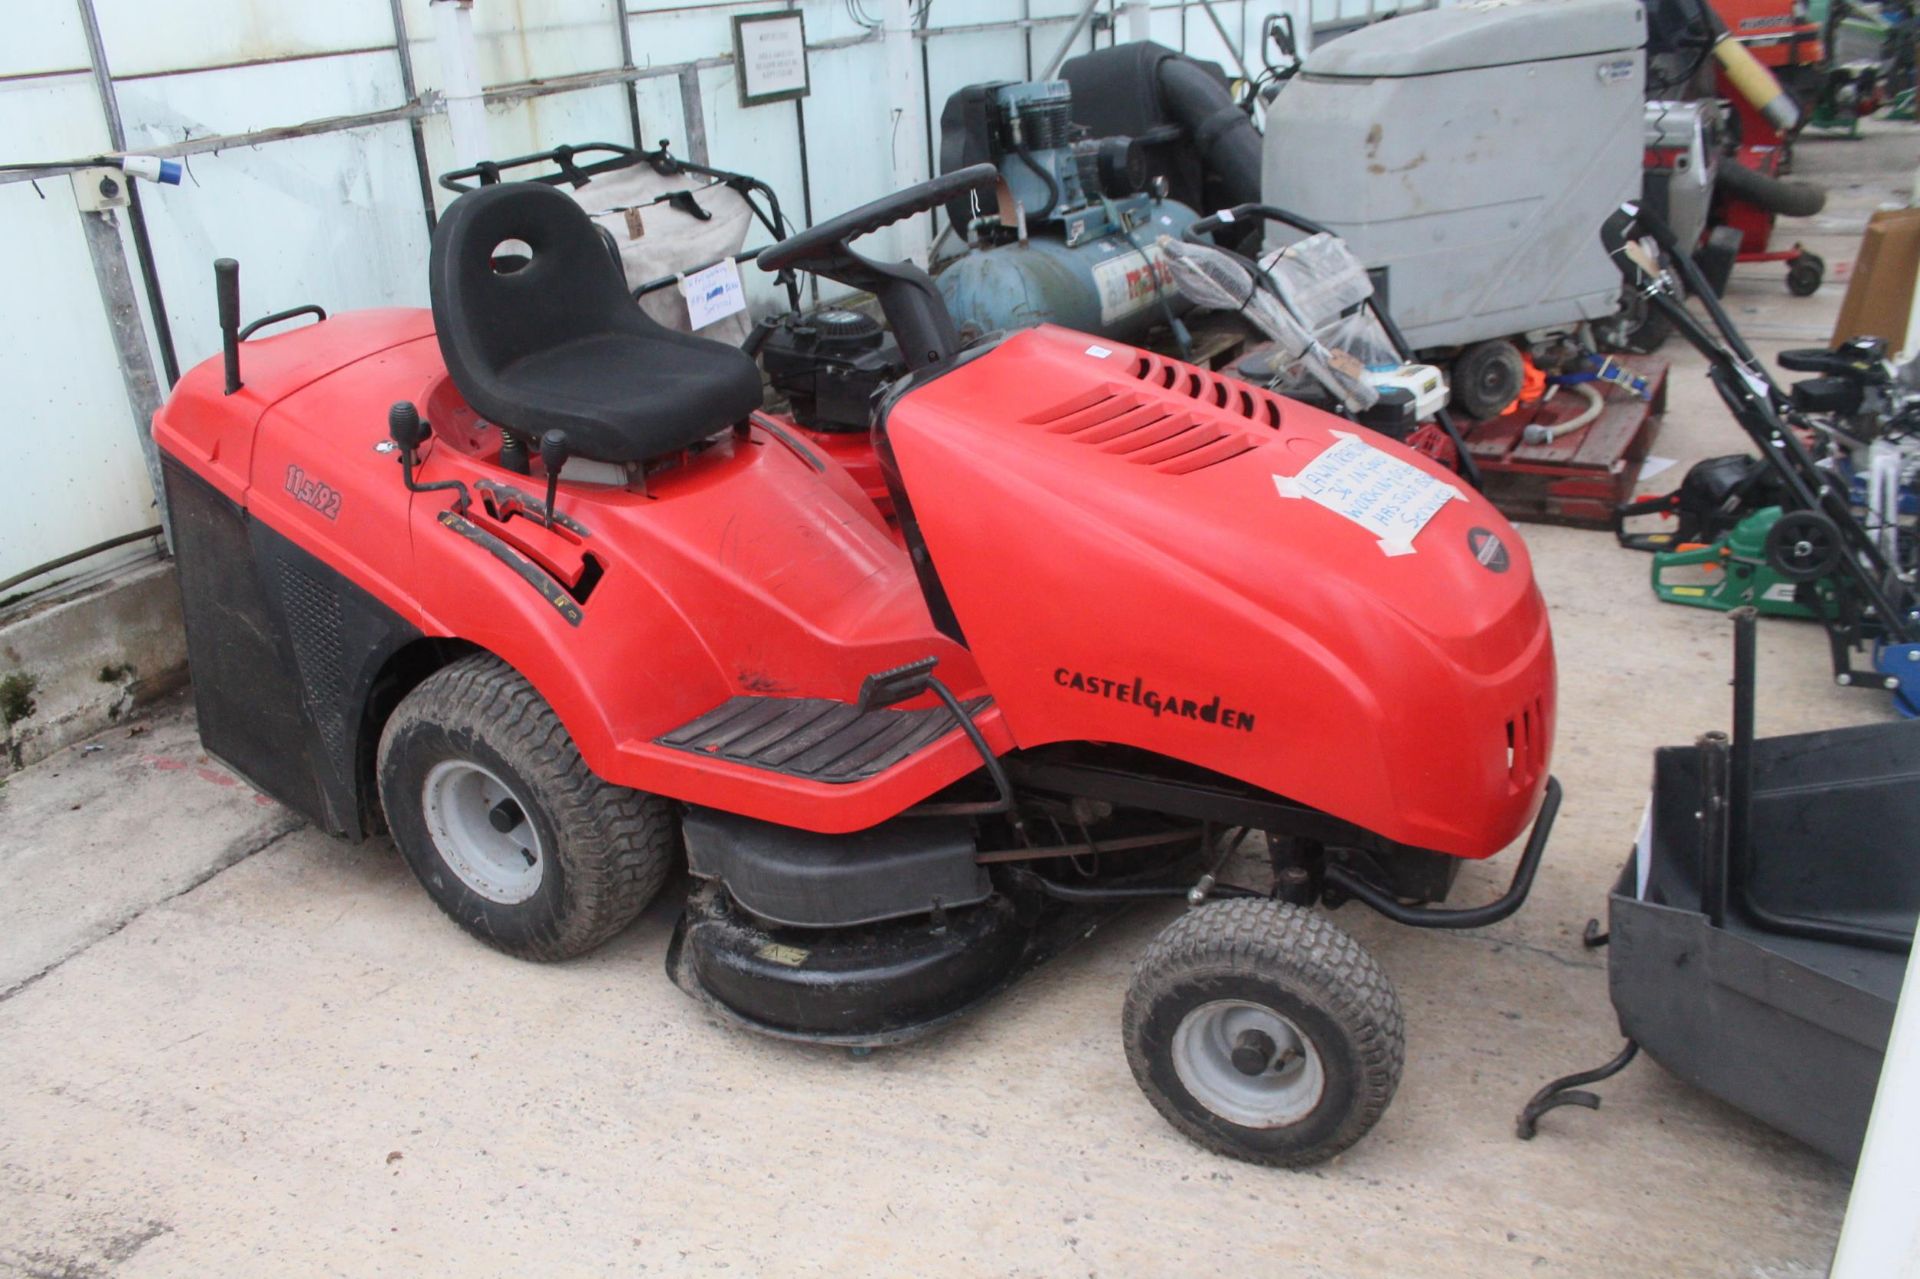 CASTOL GARDEN 36" 11 1/2 HP BRIGGS & STRATTON ENGINE LAWN TRACTOR WITH GRASS DEFENDER WITH GRASS - Image 2 of 2